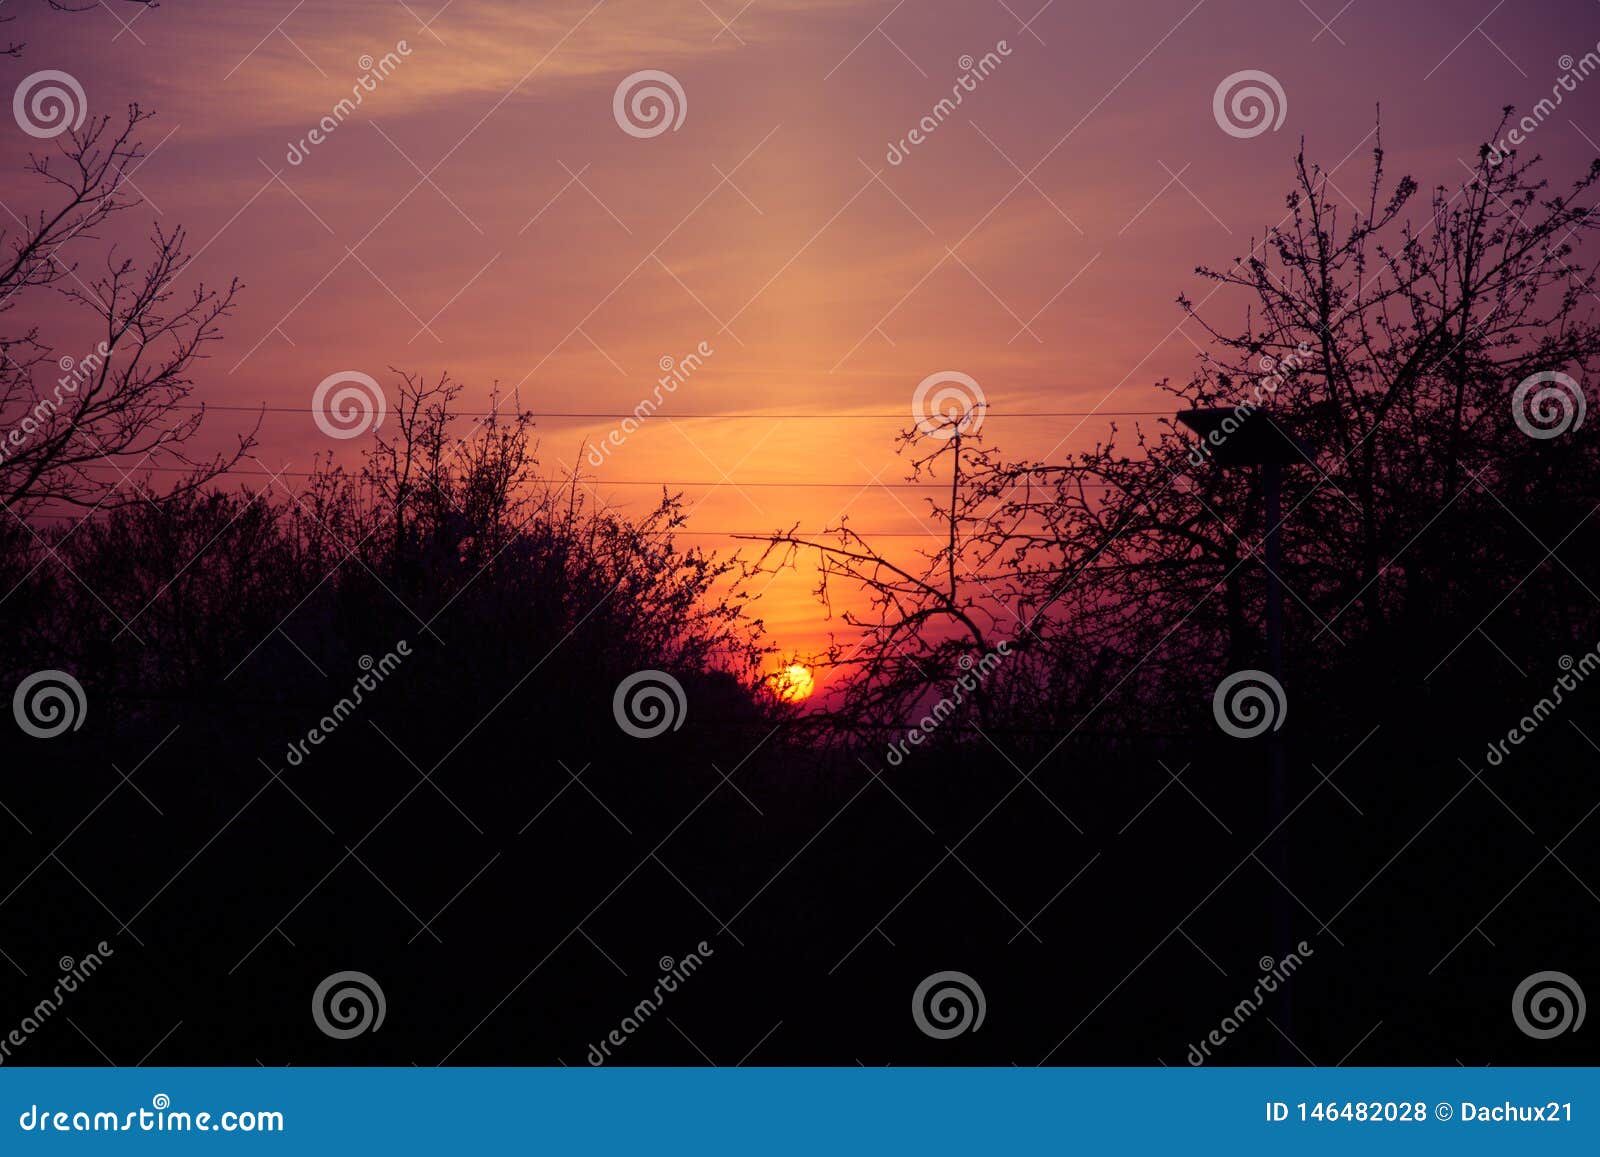 A Beautiful, Blazing Sunset through the Tree Branches. Stock Photo